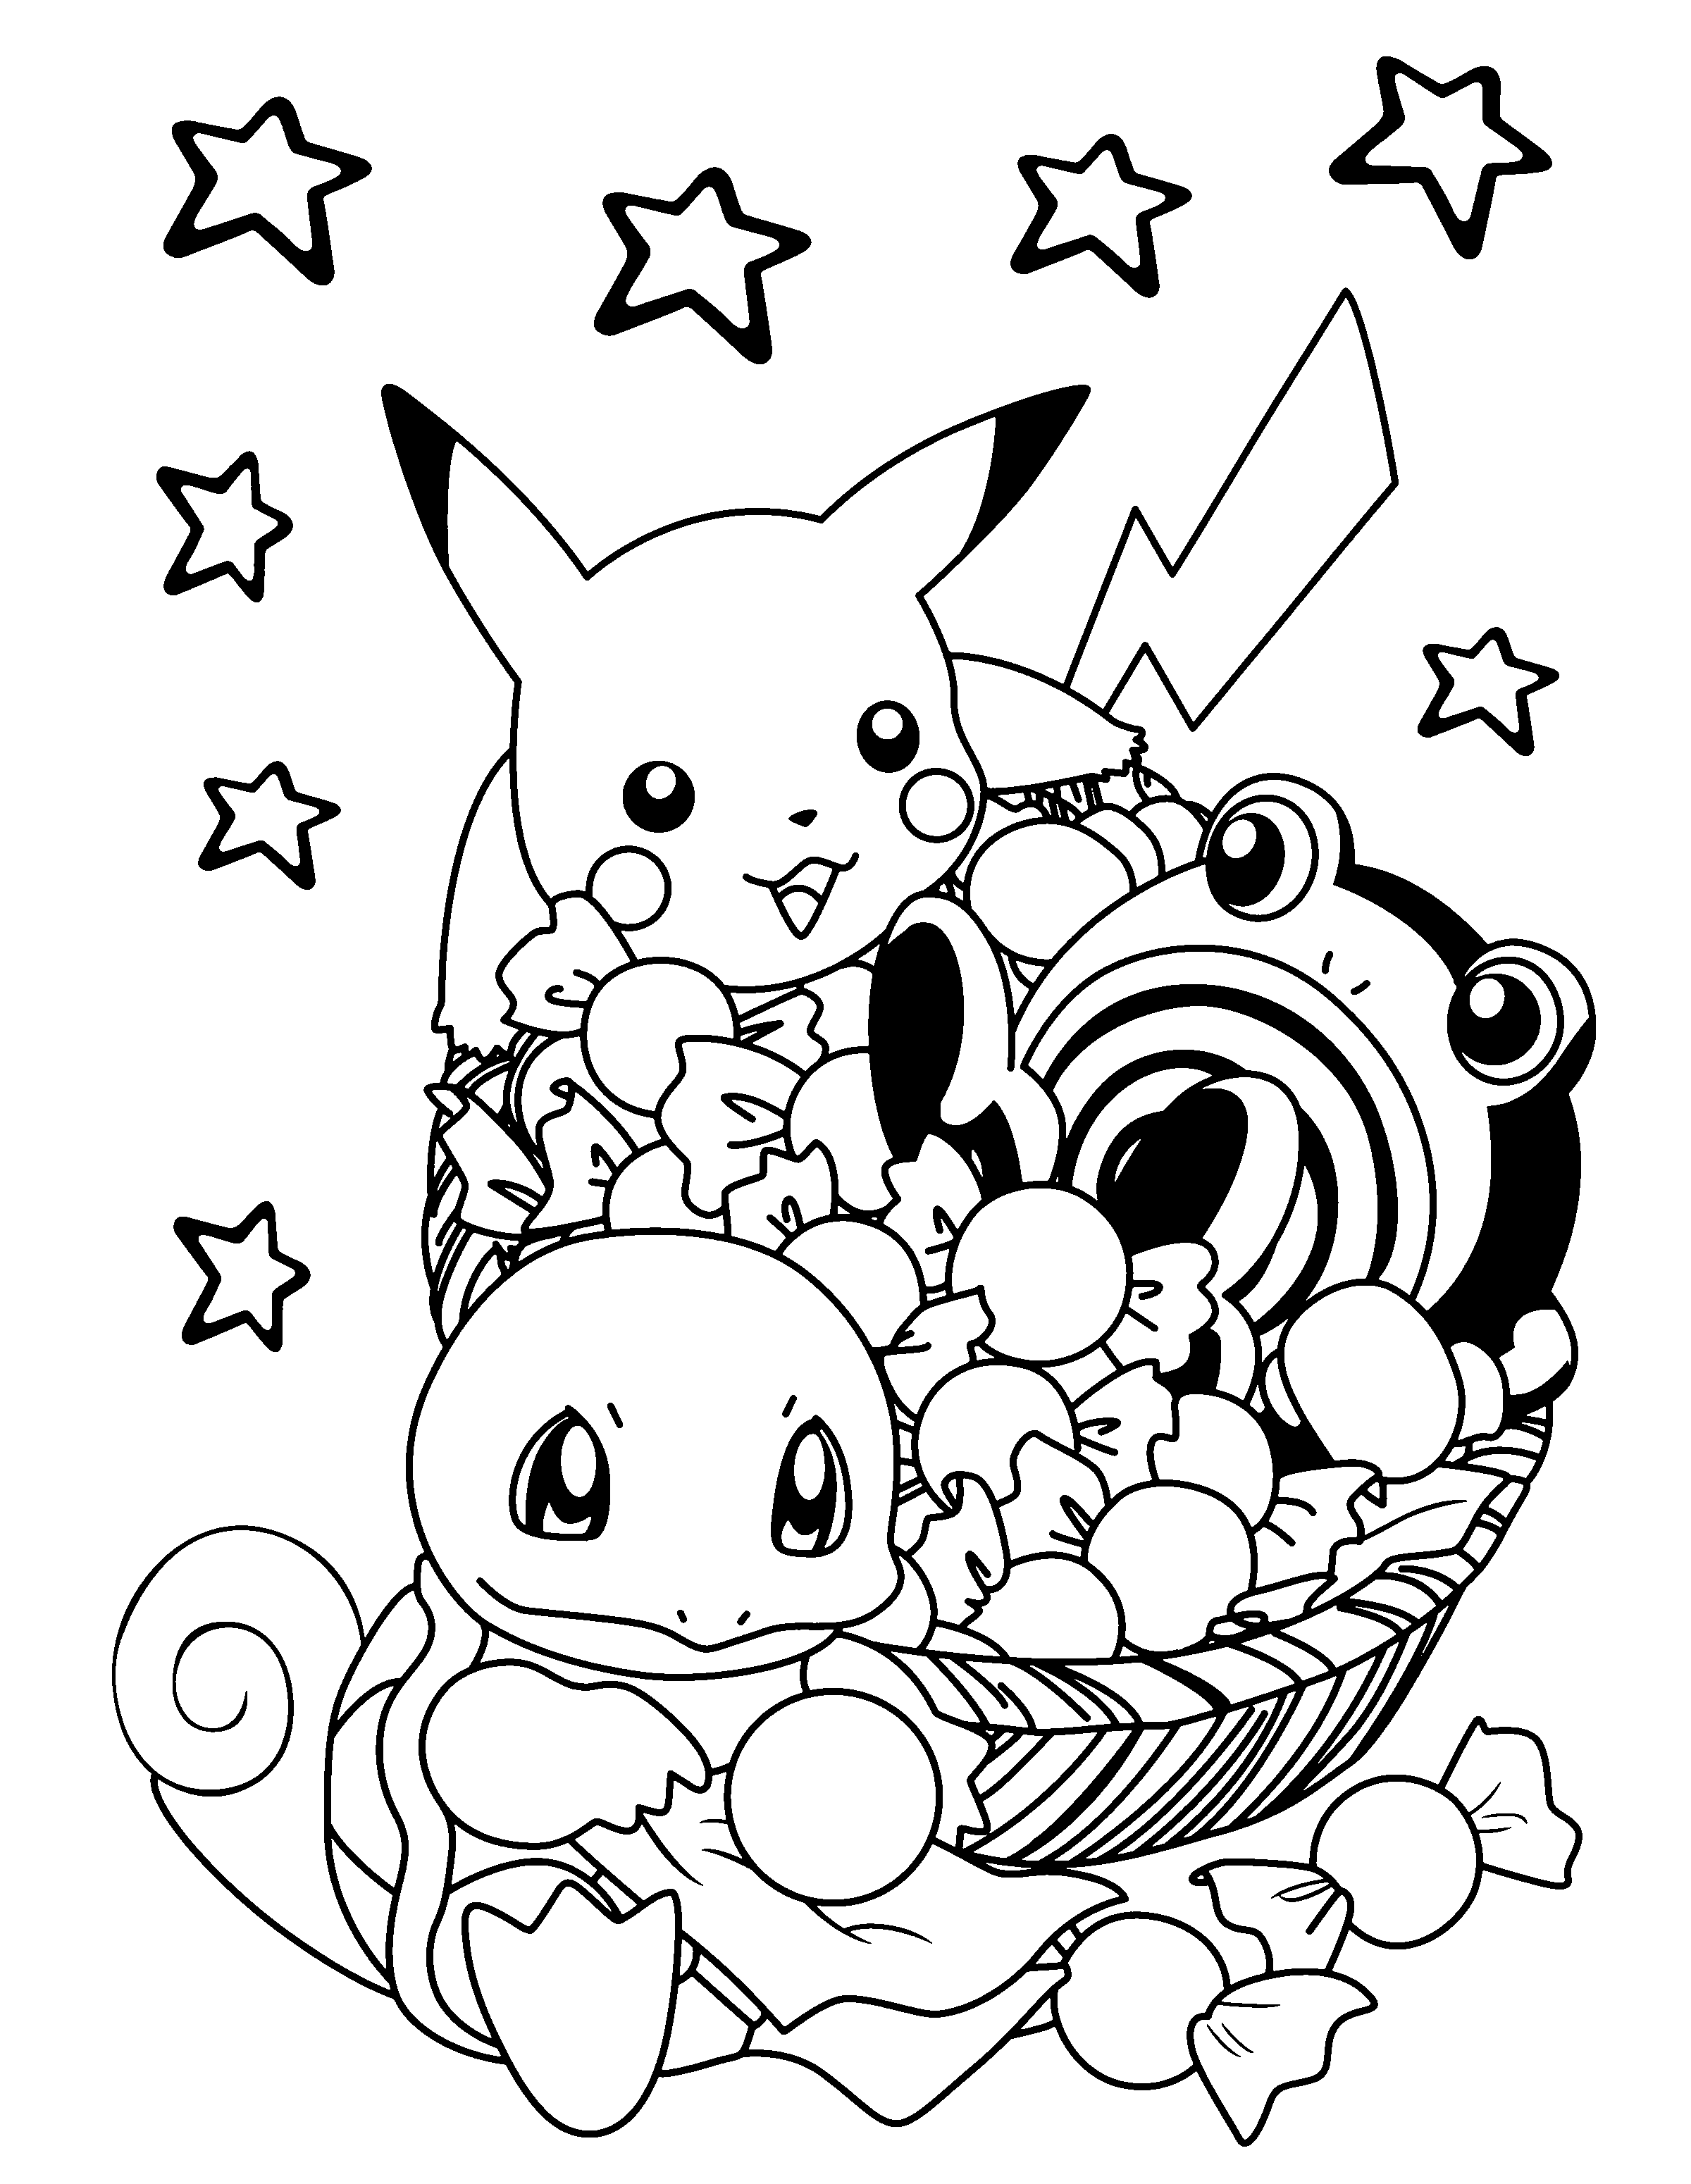 Black & White coloring #1, Download drawings